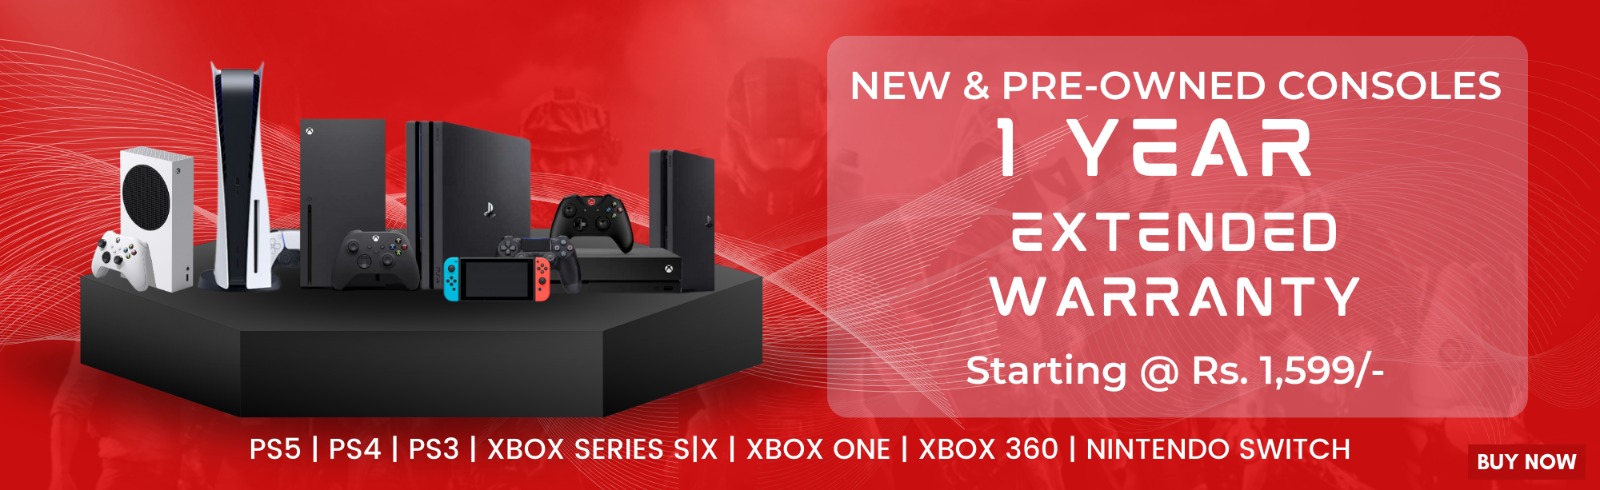 new and pre-owned consoles banner